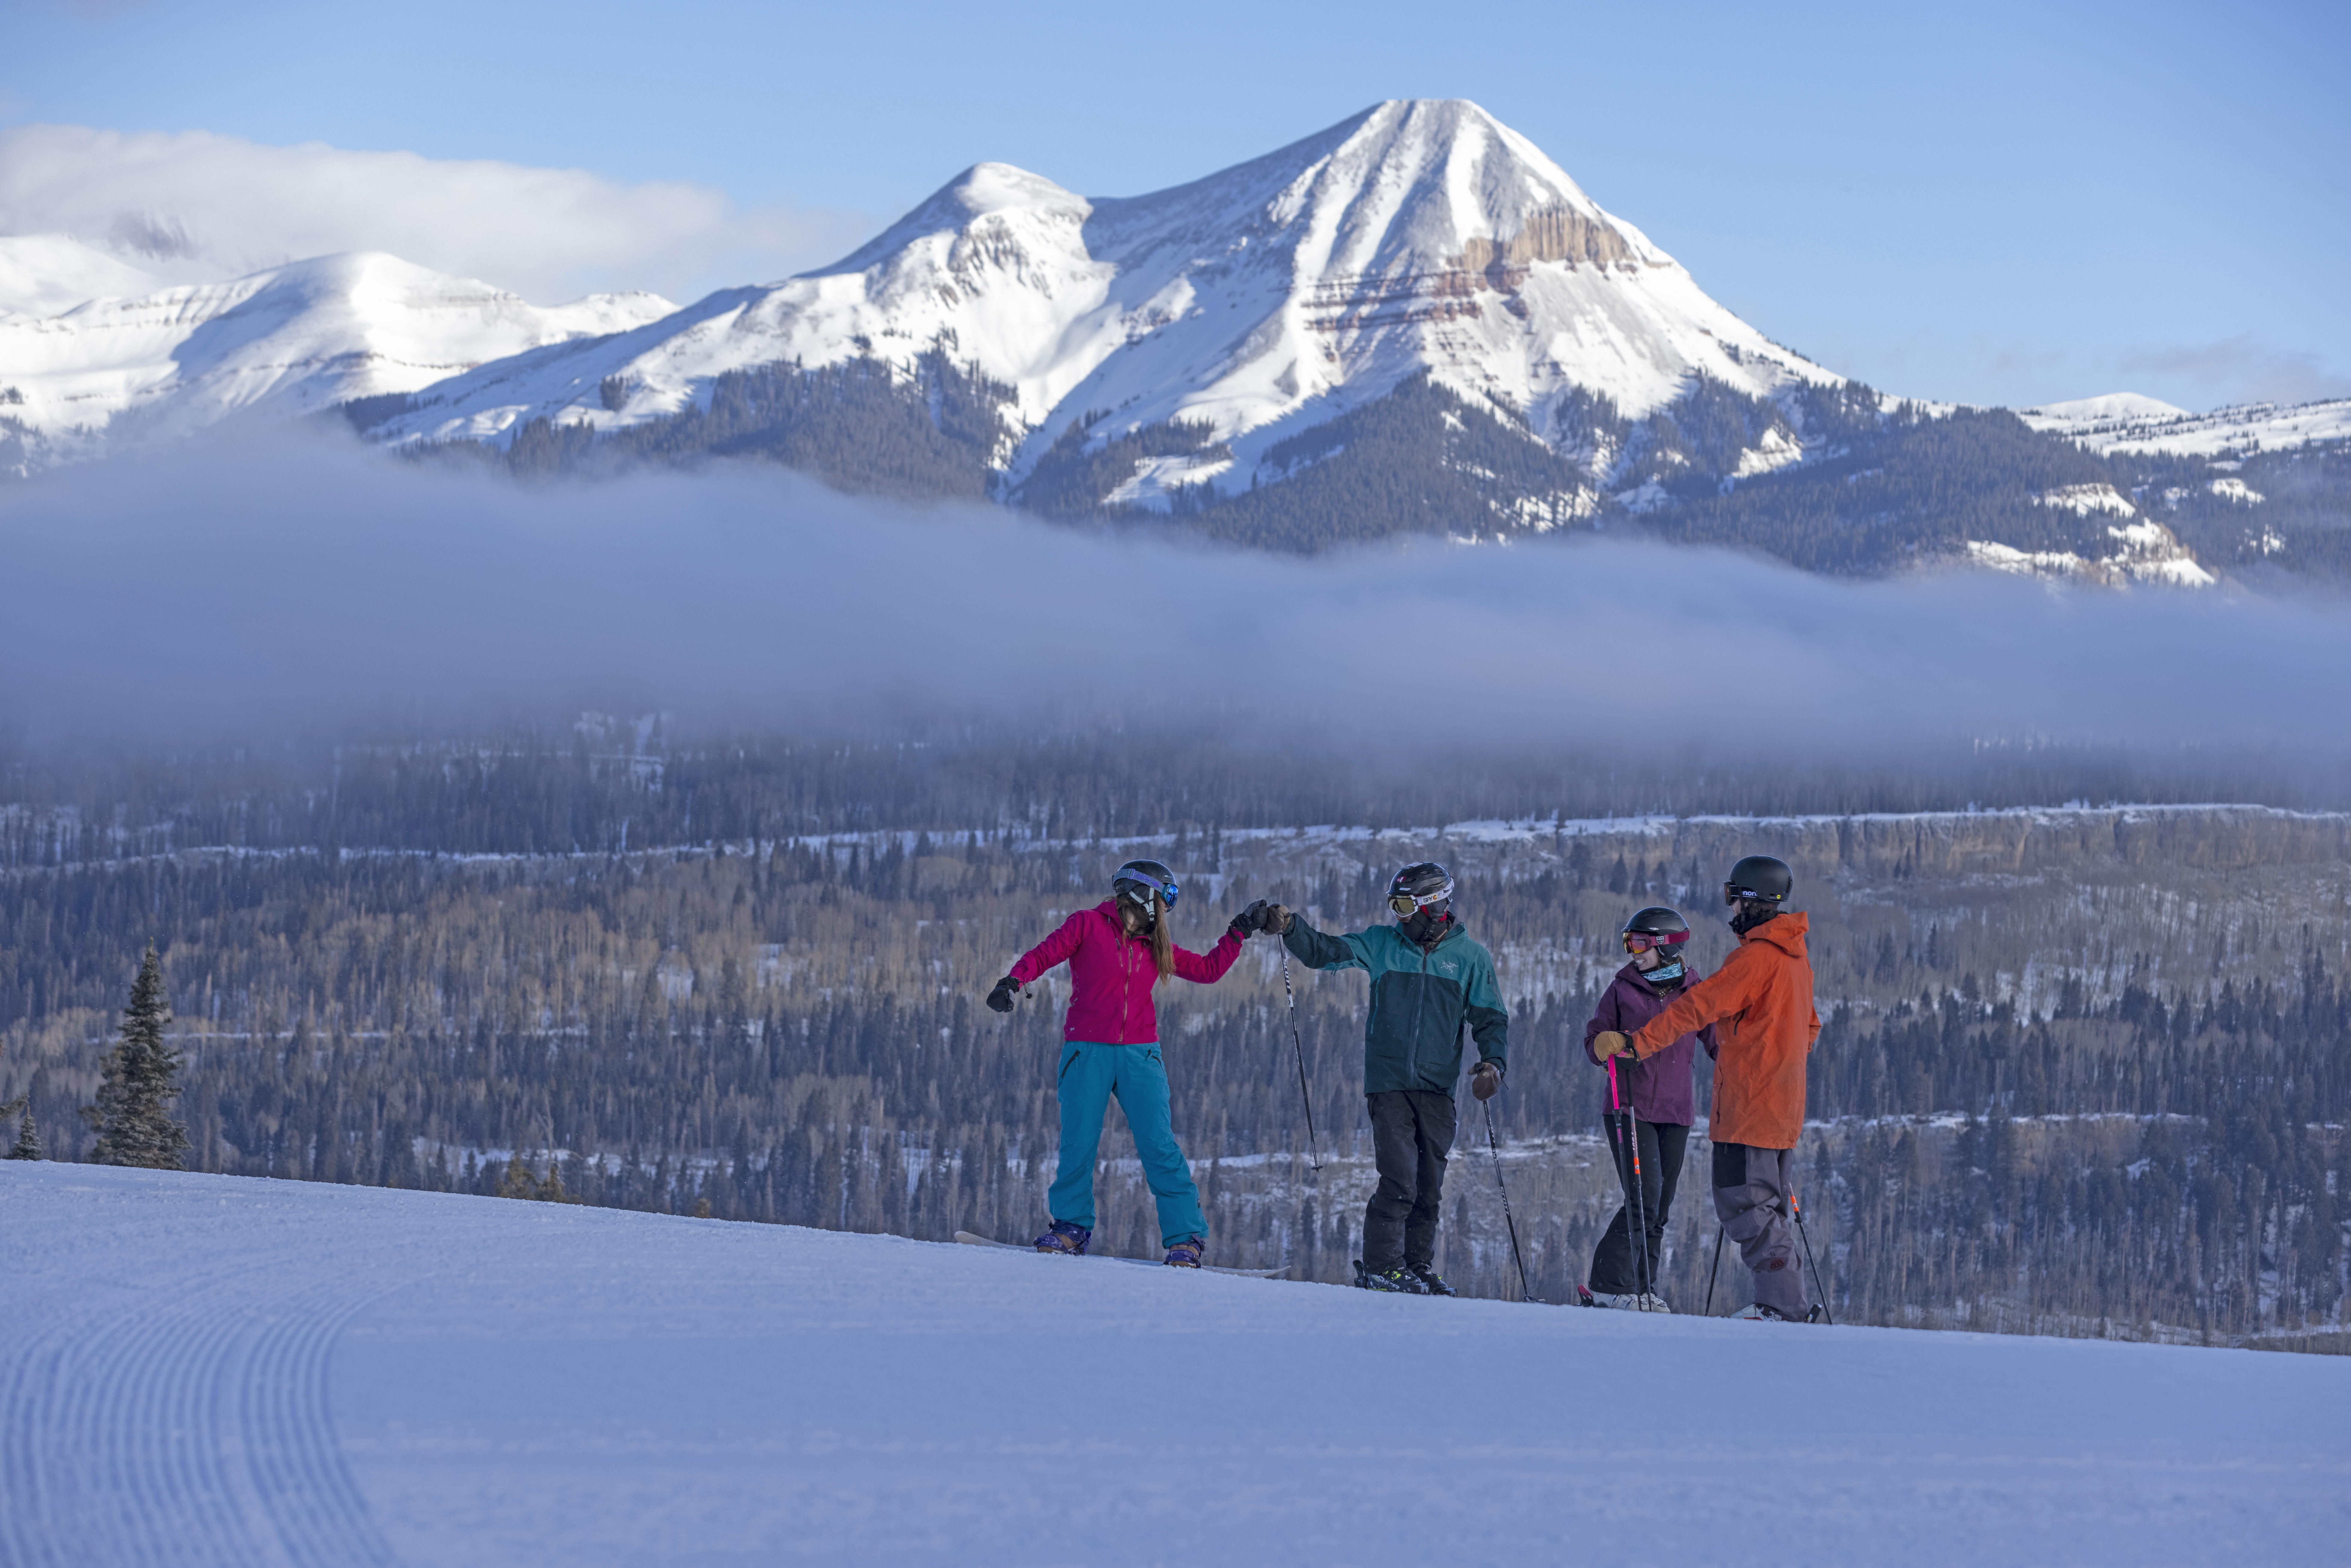 A group of skiers enjoying the views of the San Juan Mountains